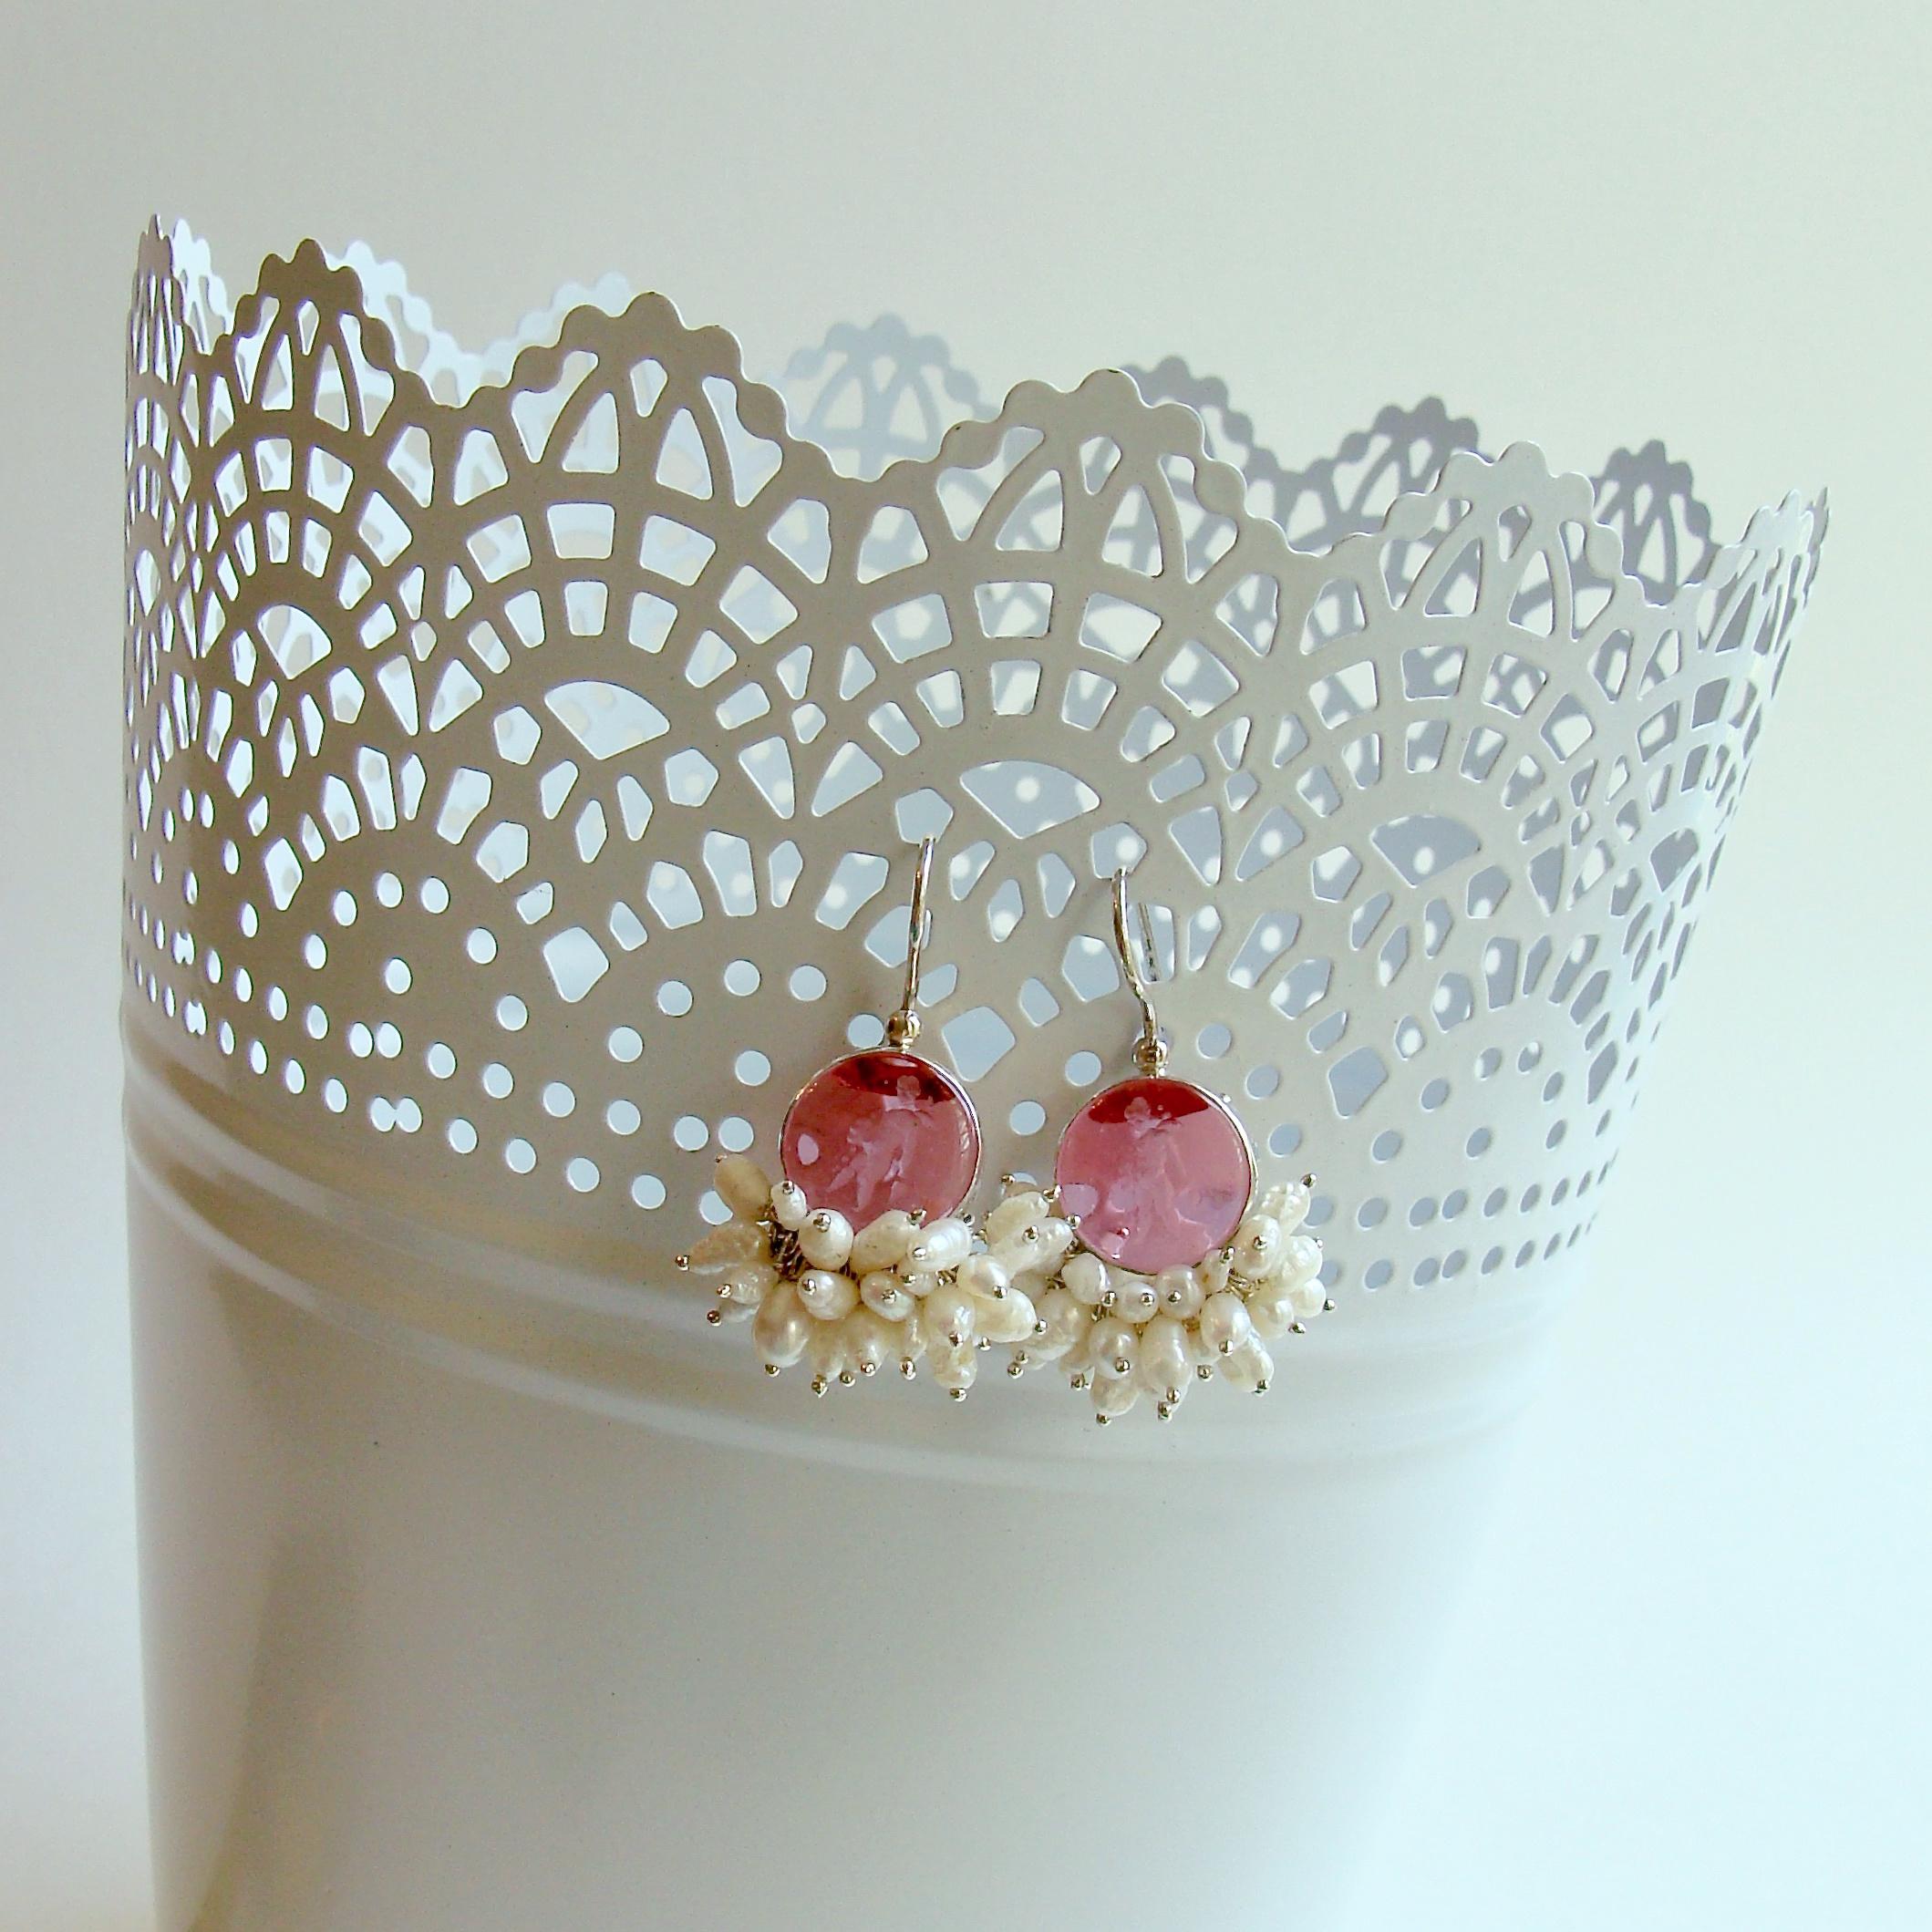 Neoclassical Pink Intaglio Earrings With Pearls Clusters - Mattera III Earrings For Sale